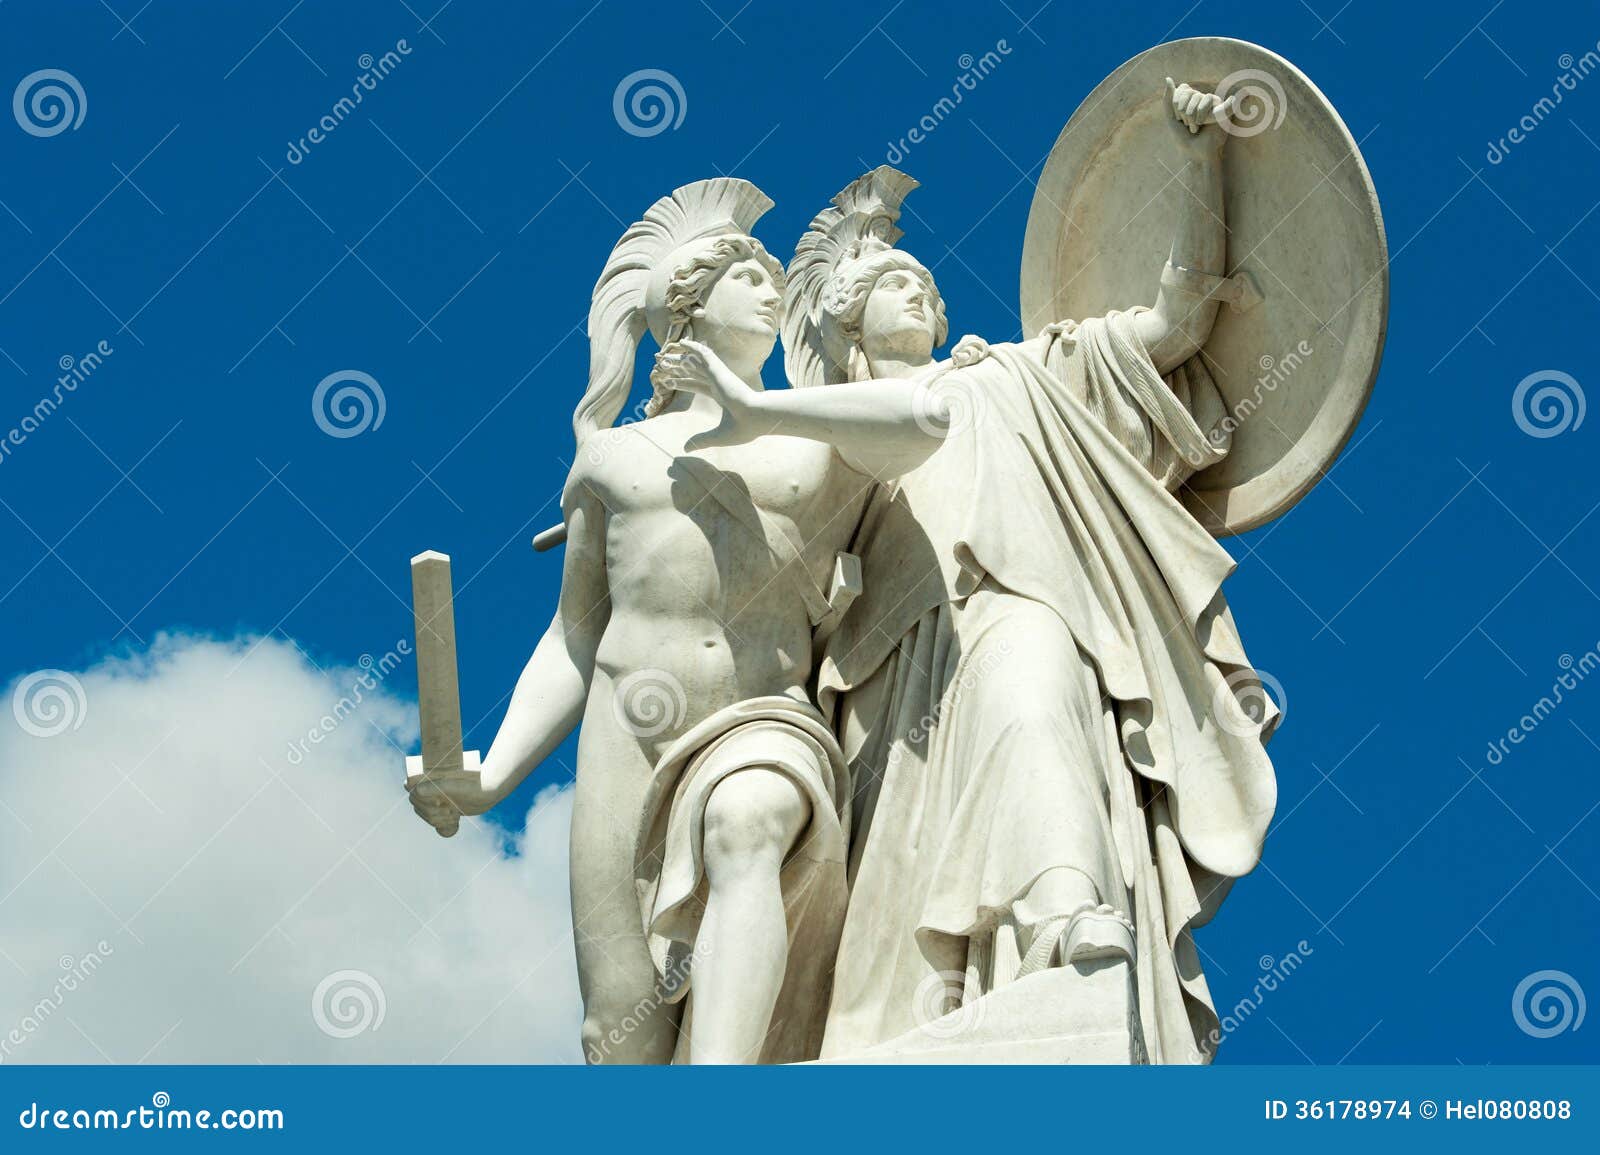 classical sculptures in berlin - athena protects the young hero. carrara marble sculpture by gustav blaeser 1854,